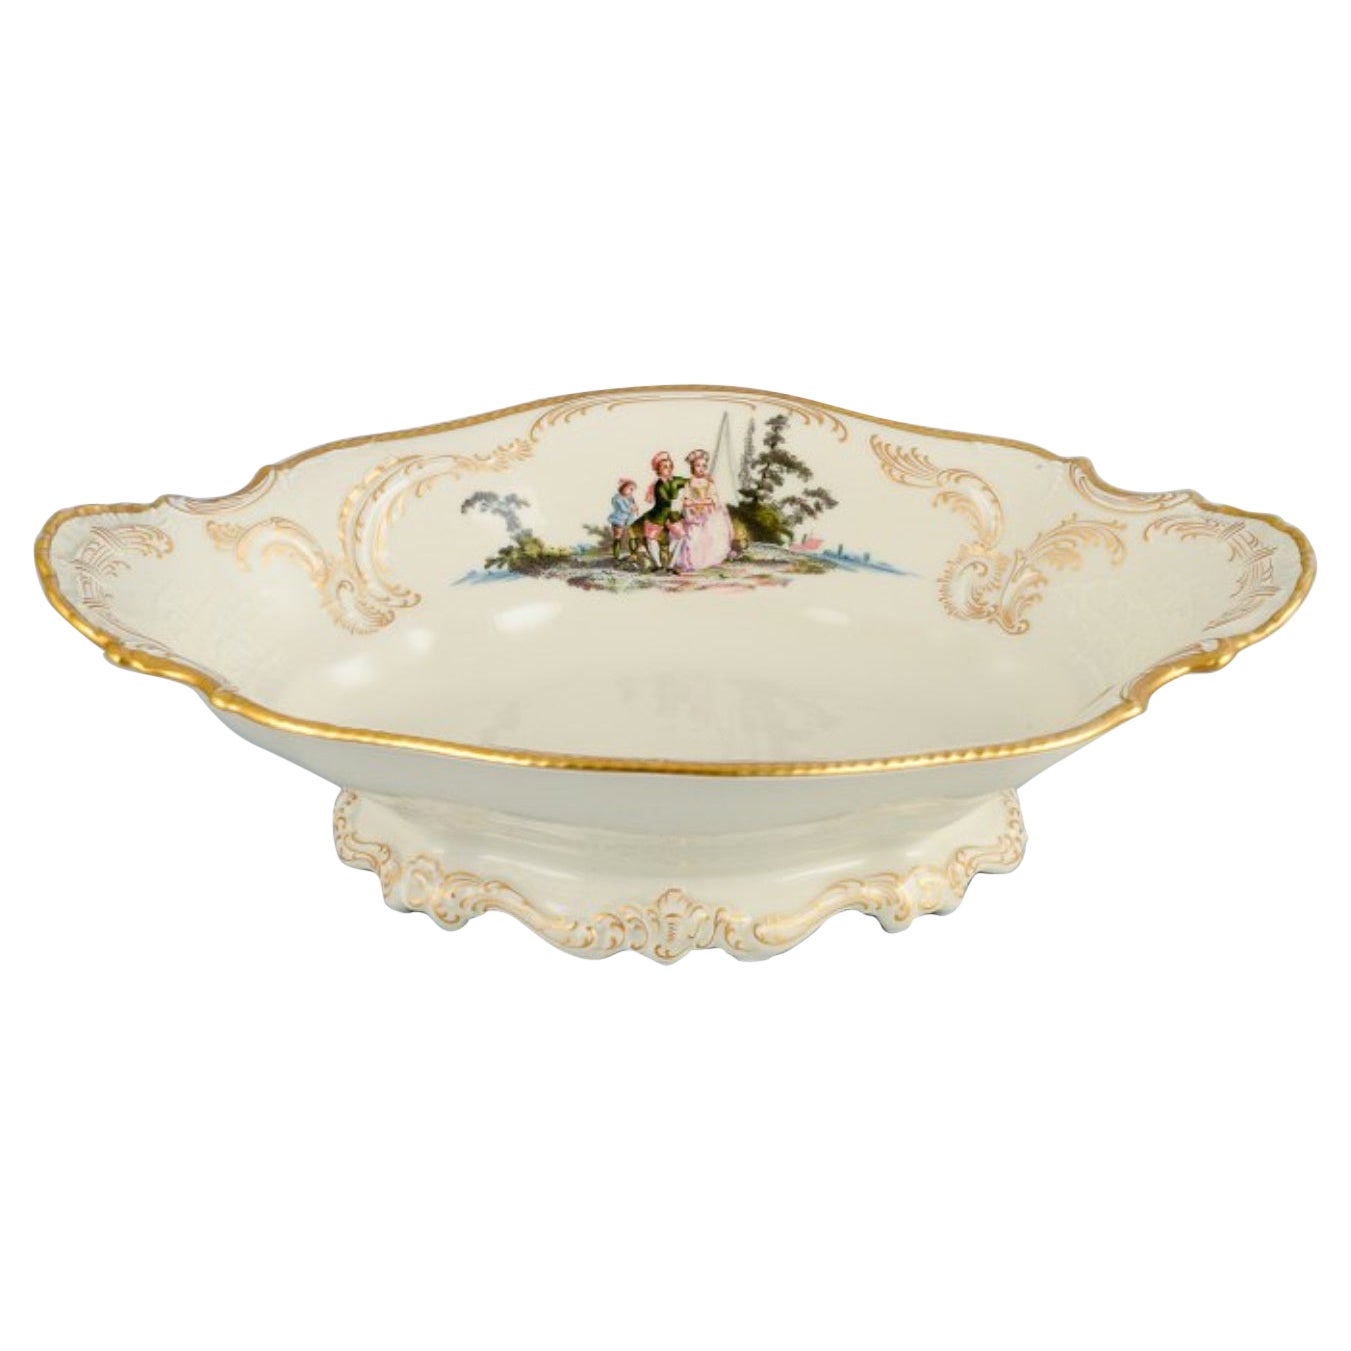 Rosenthal, Germany. "Sanssouci", Large Oval Cream-Colored Bowl For Sale